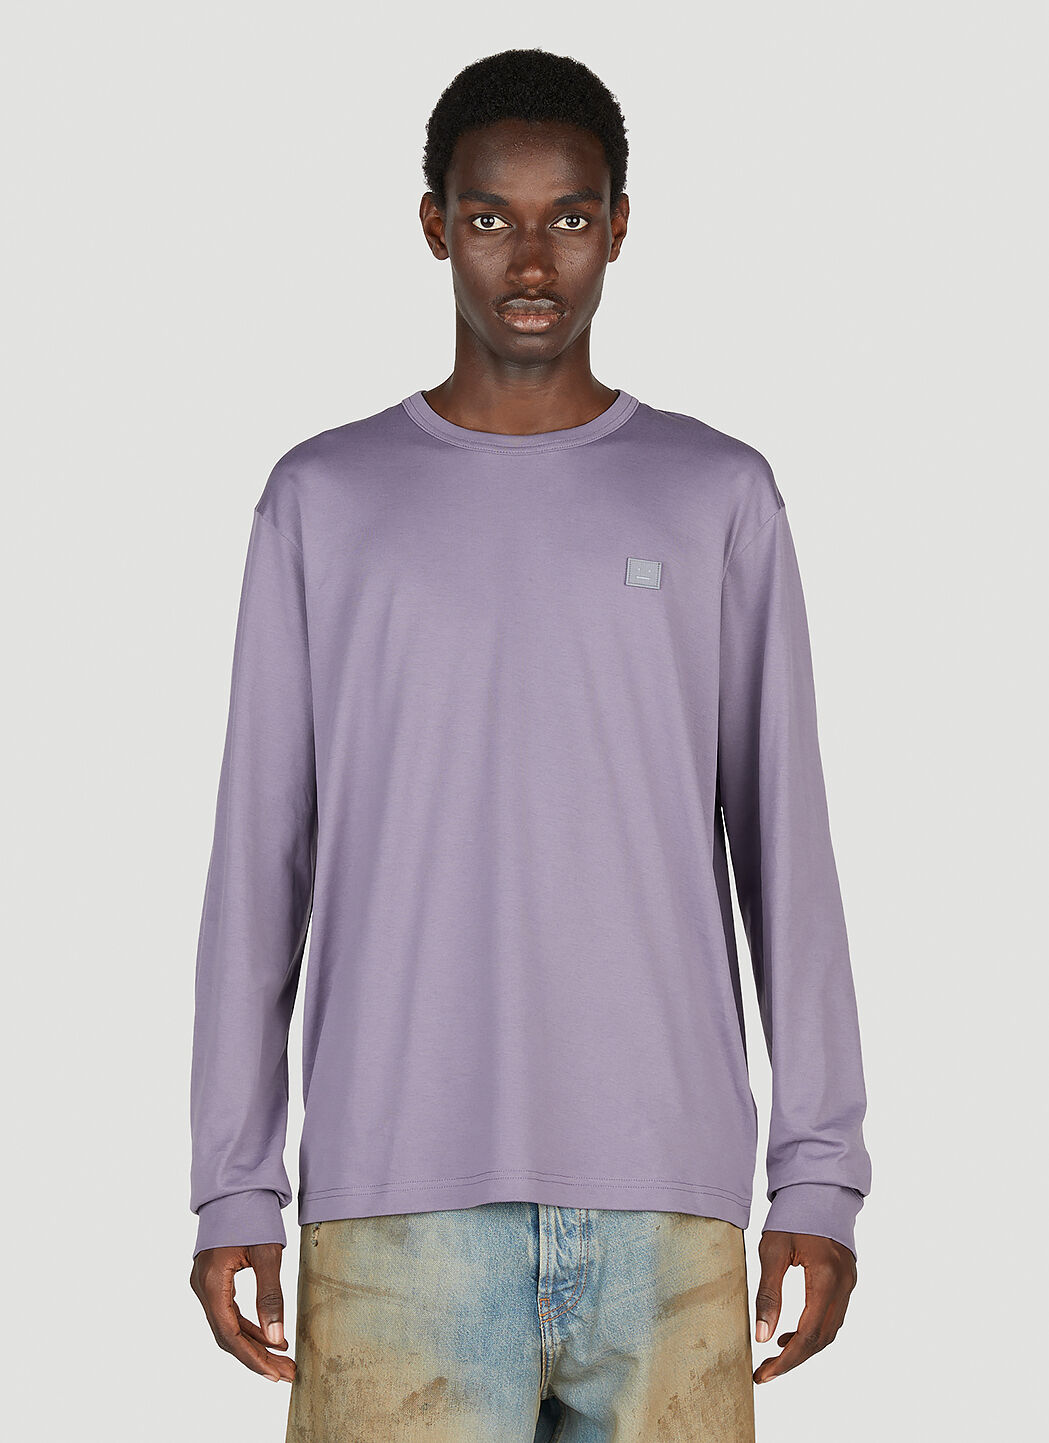 Acne Studios Face Patch Long Sleeve T-shirt In * relaxed Fit * true To  Size, Please Take Your Regular Size * model Is 6ft 1in / 1 | ModeSens